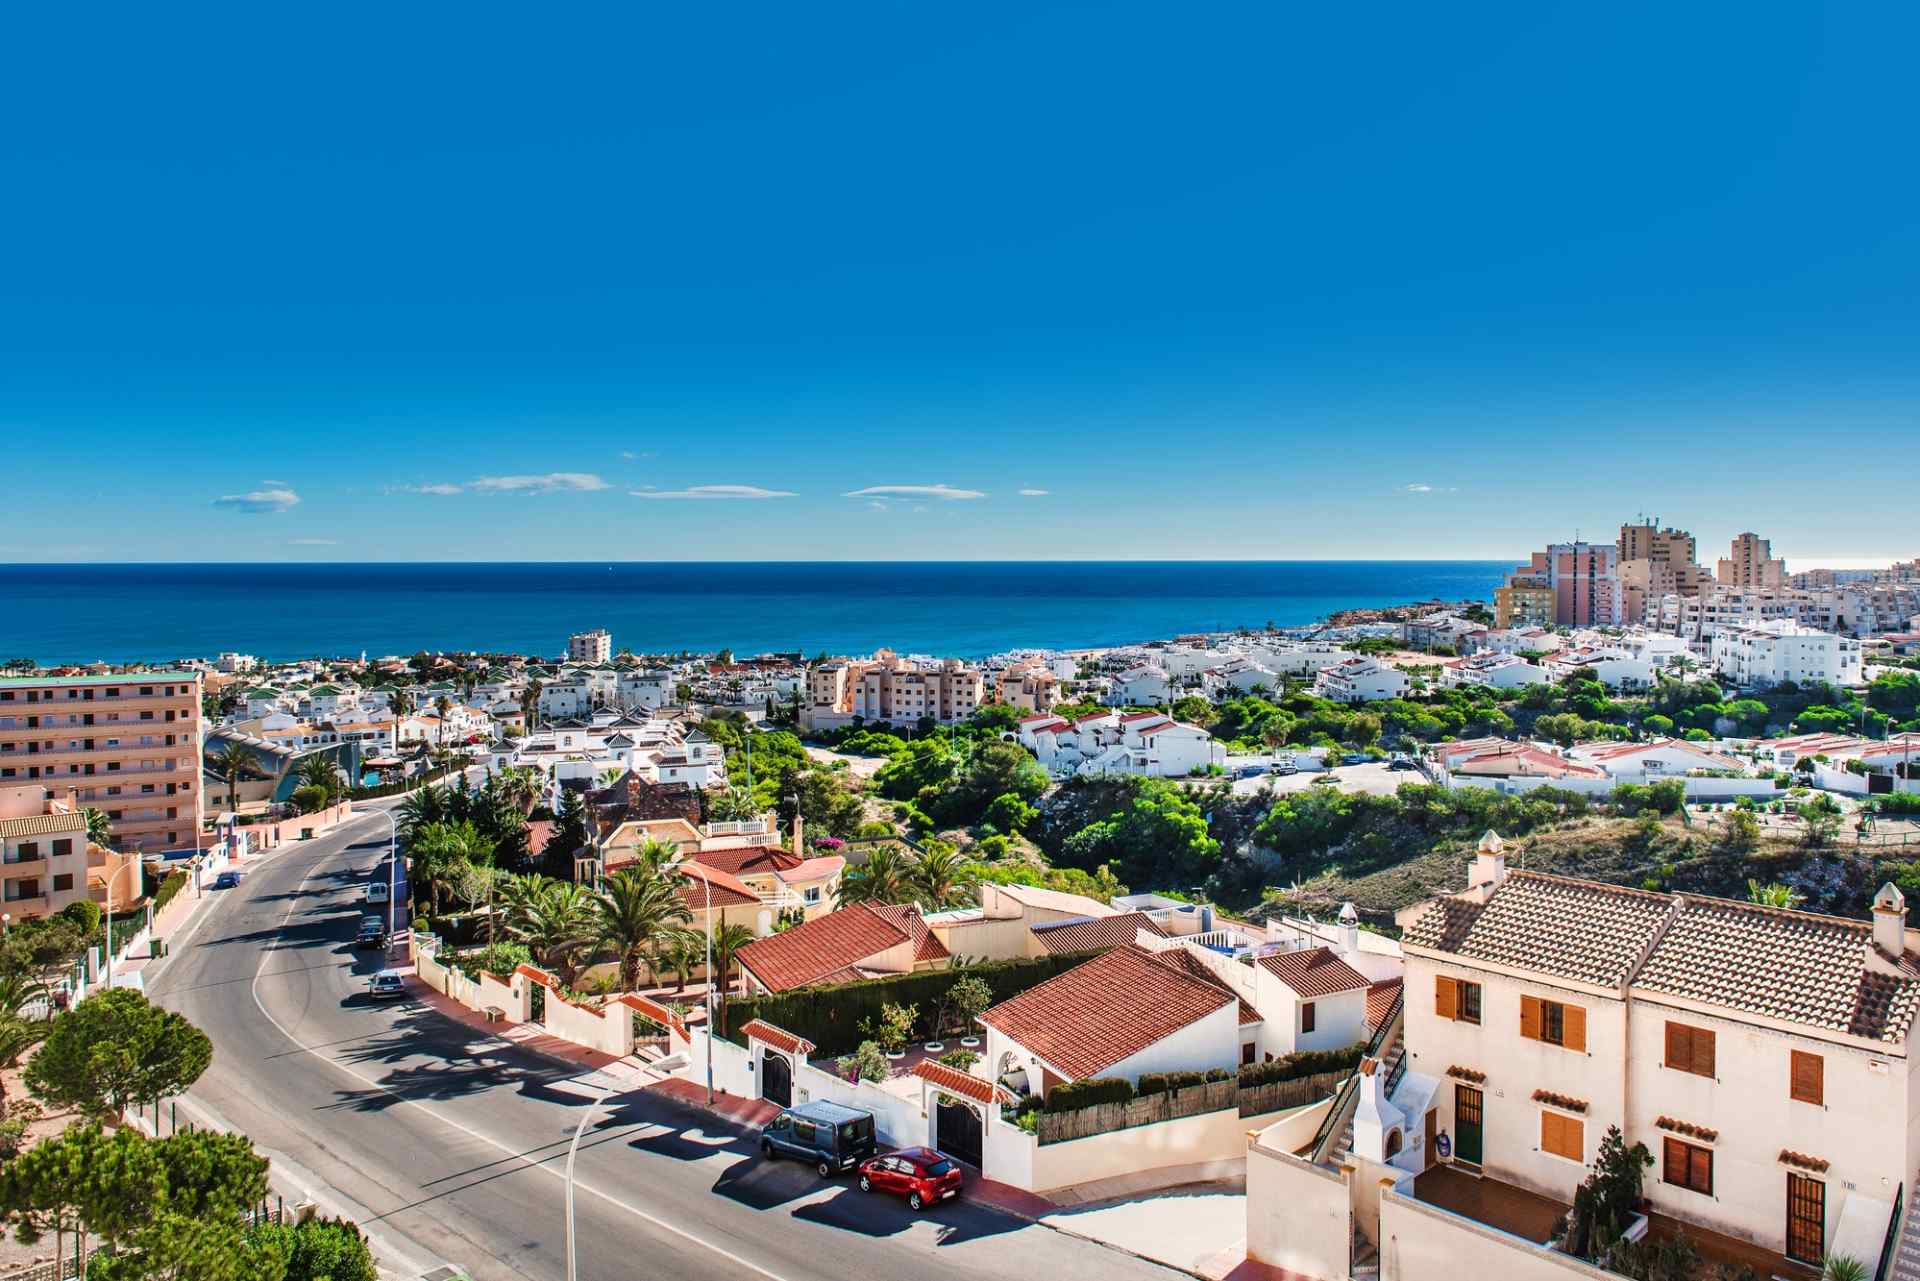 torrevieja-city-by-sea-on-sunny-day-in-costa-blanca-day-trips-from-valencia